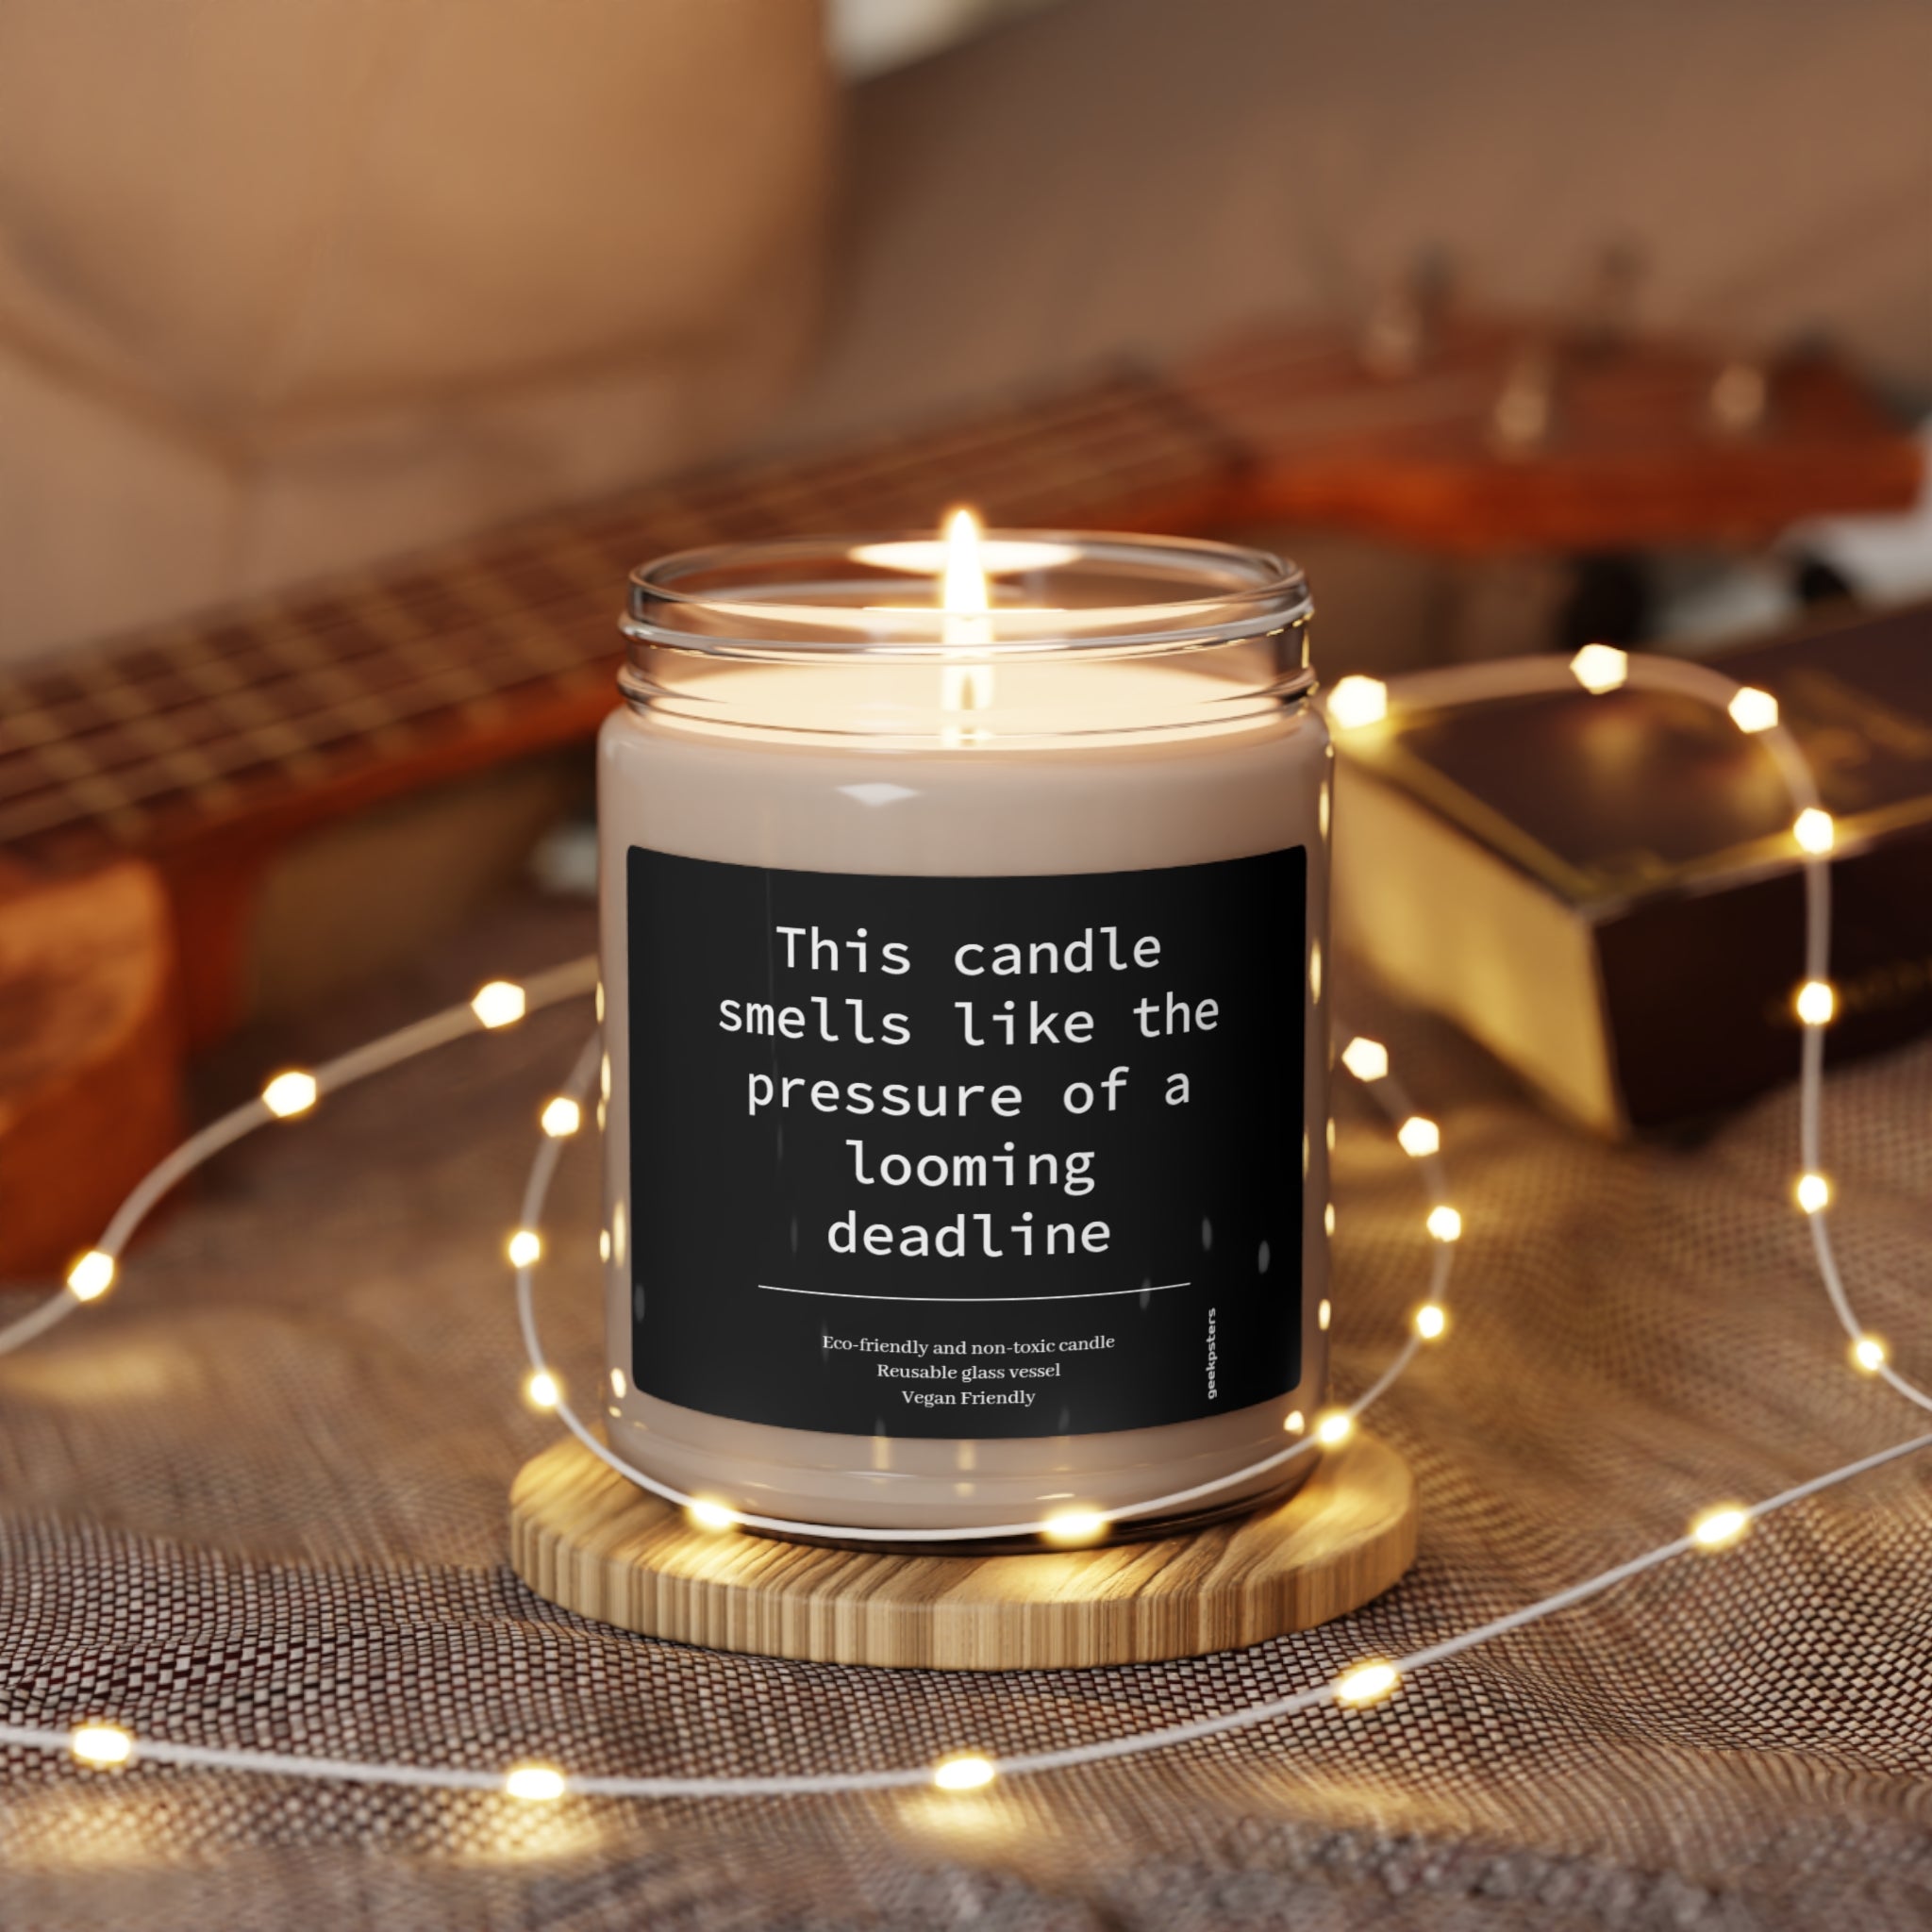 A lit "This Candle Smells Like the Pressure of a Looming Deadline" 9oz soy candle with the label placed on a wooden holder, surrounded by fairy lights, with gift boxes in the background.